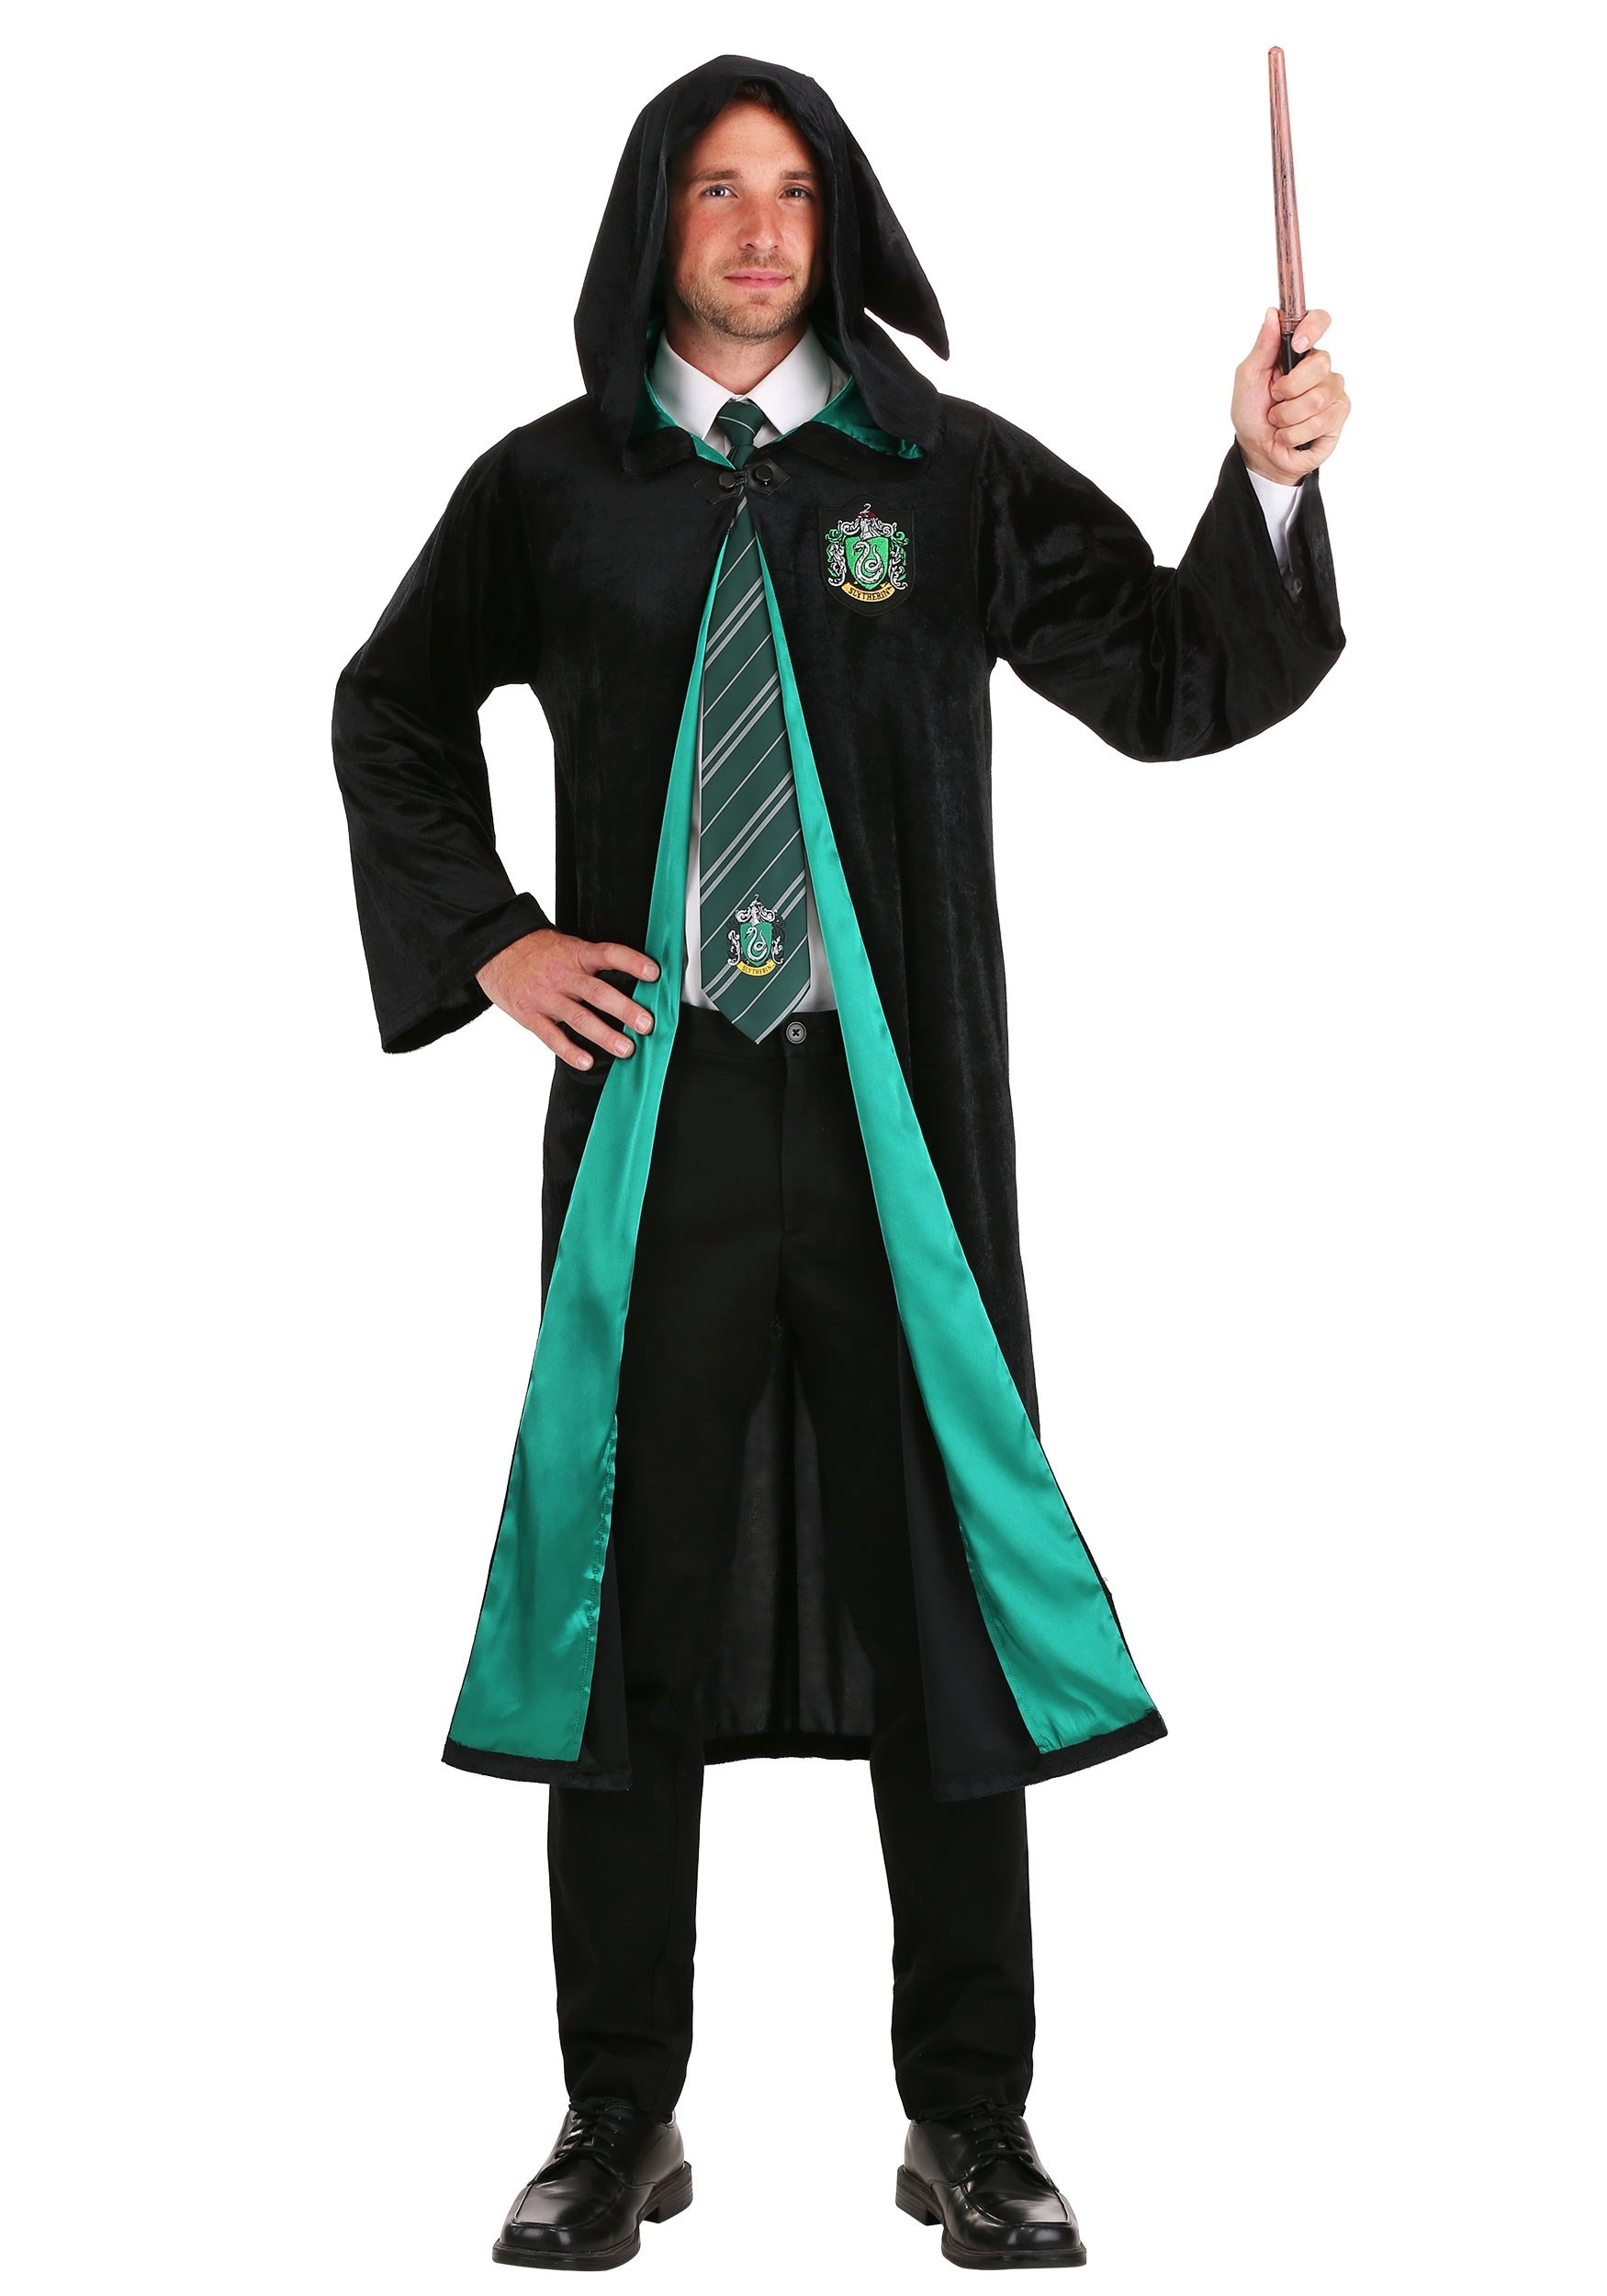 https://images.halloweencostumes.com/products/62967/2-1-137447/deluxe-harry-potter-adult-plus-size-slytherin-robe-alt2.jpg